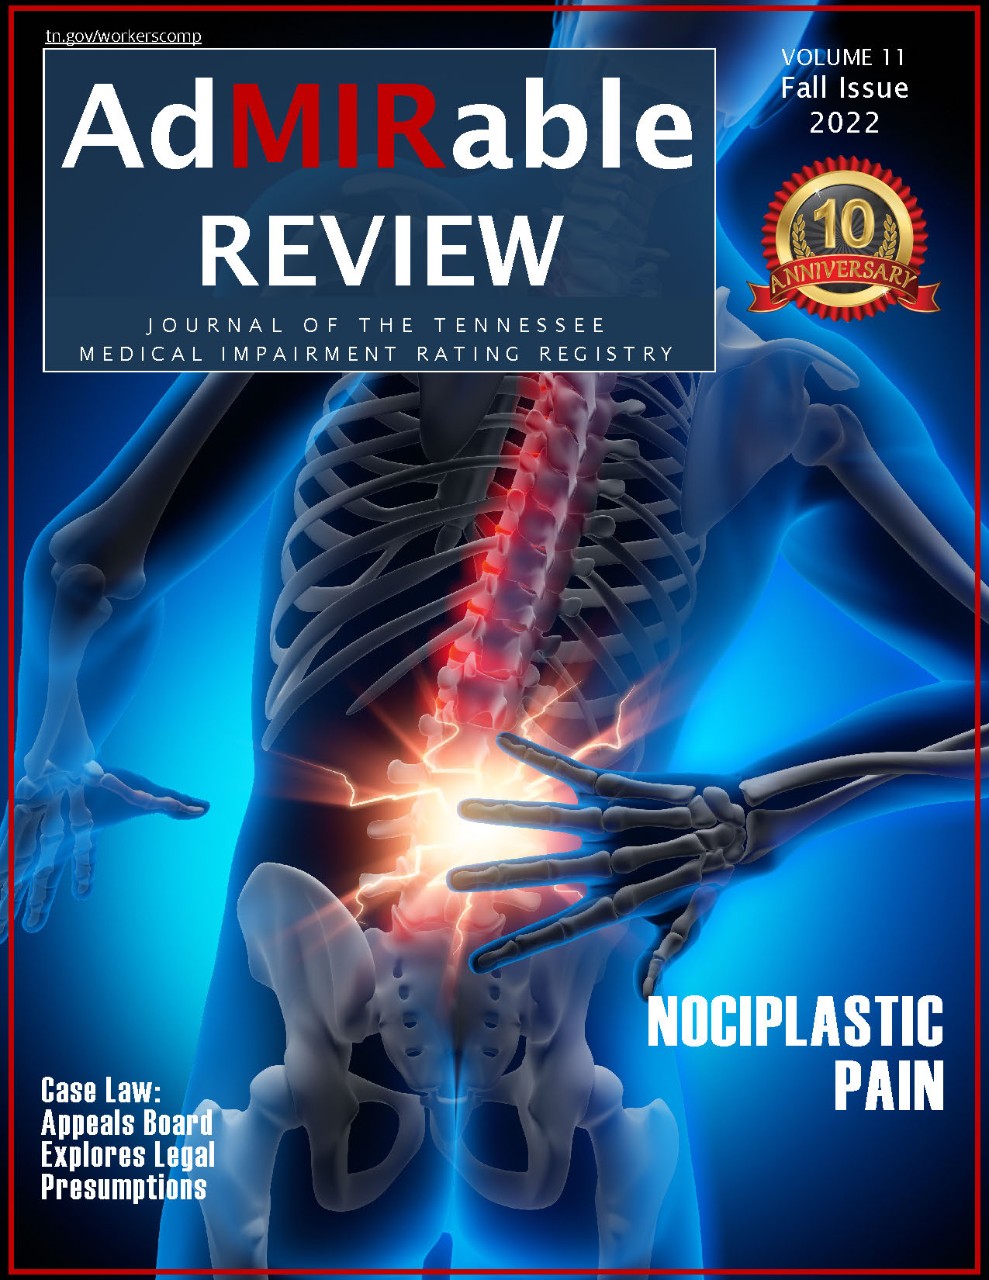 AdMIRable Review journal digital cover with a musculoskeletal hand reaching to a pain point along its lower spine.